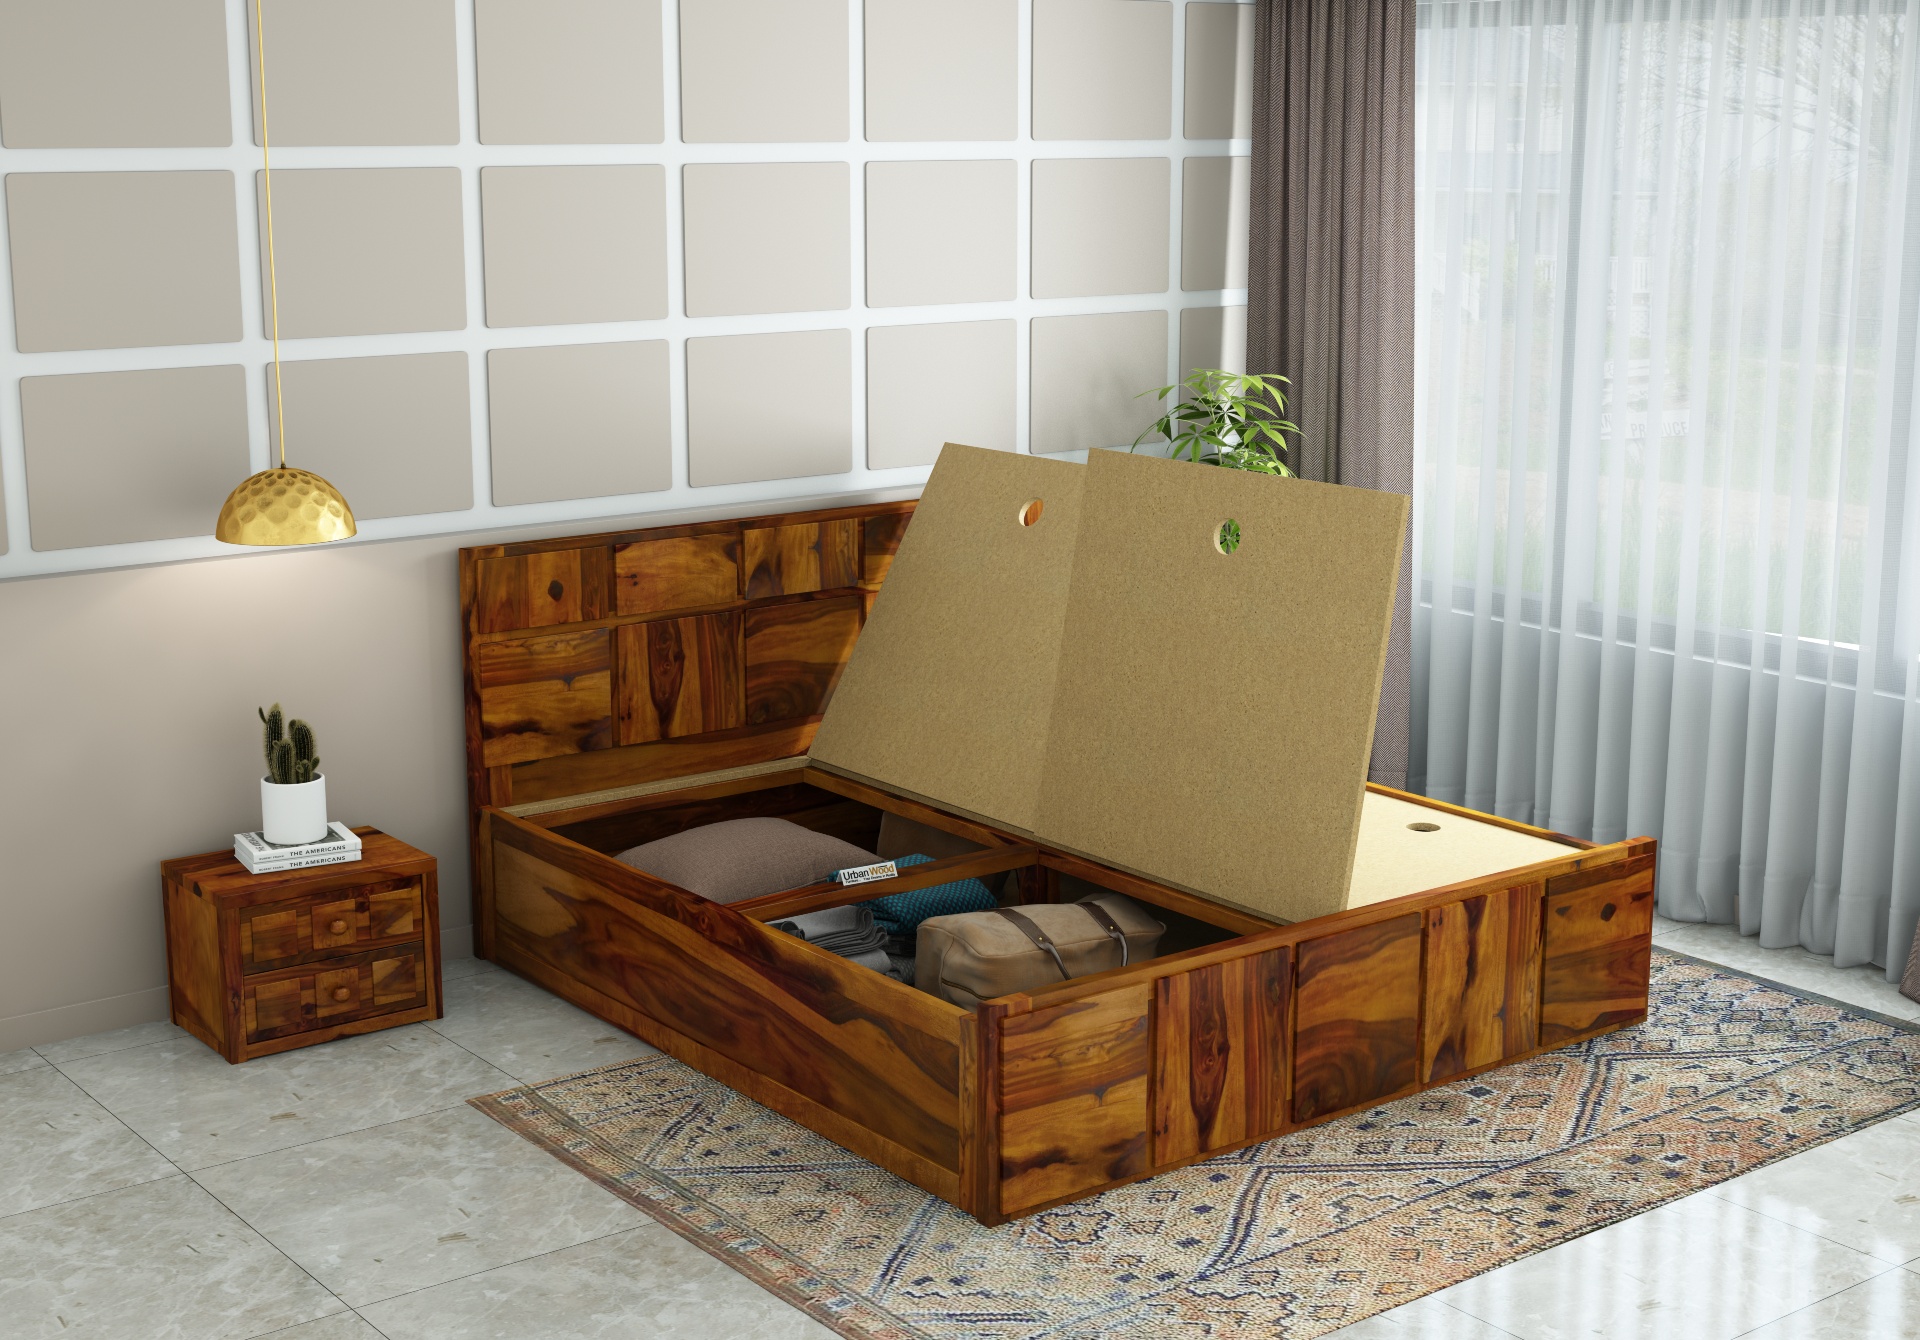 Bedswind Bed With Box Storage 